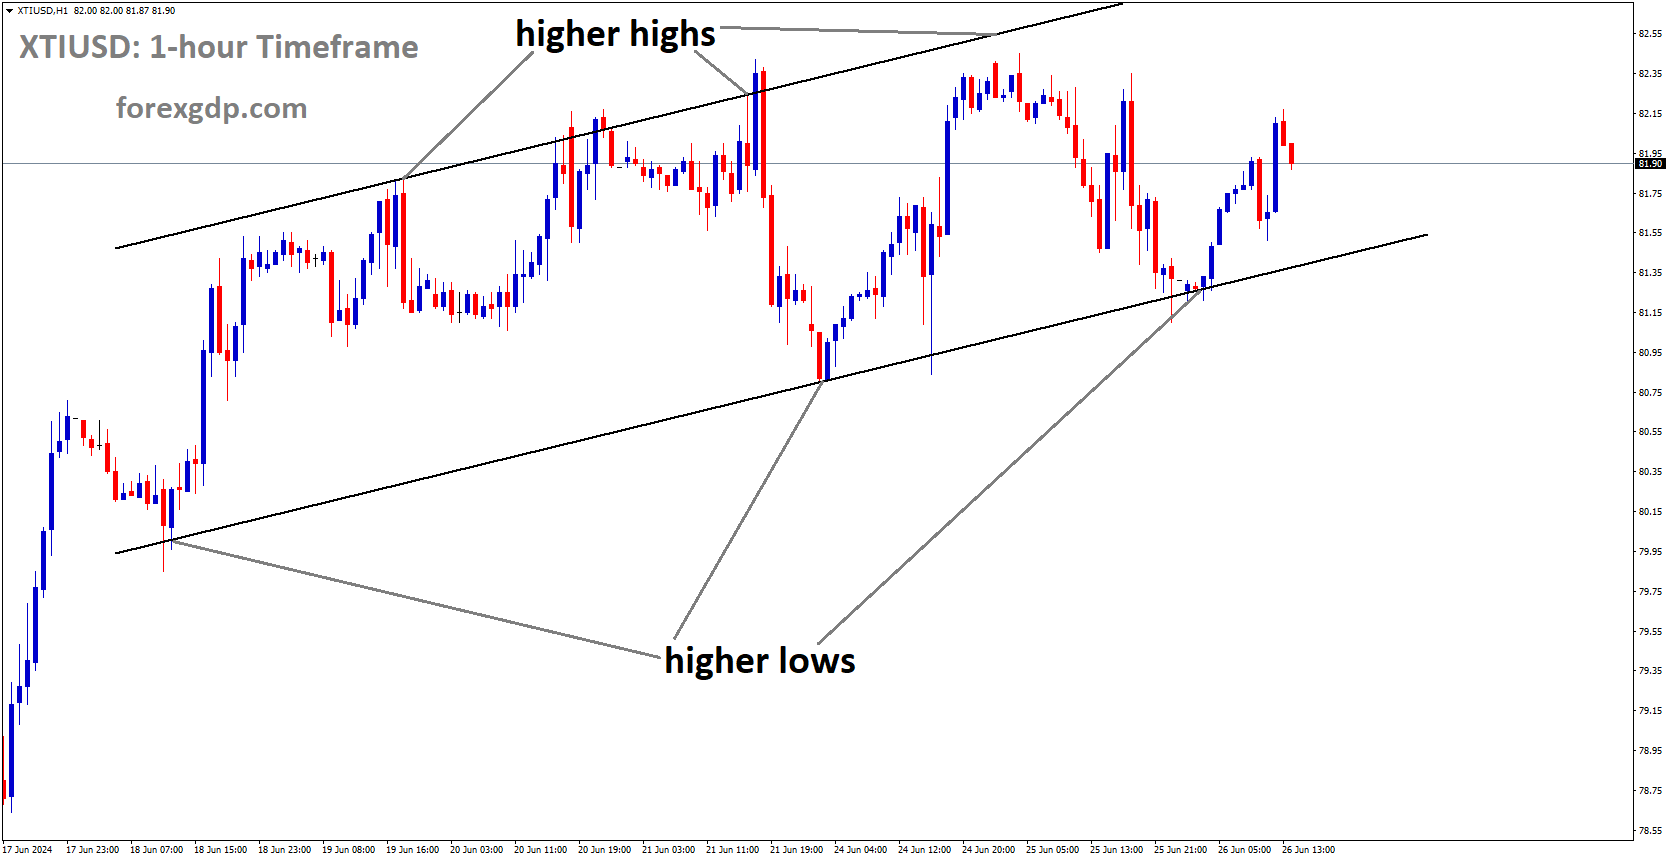 XTIUSD is moving in Ascending channel and market has rebounded from the higher low area of the channel